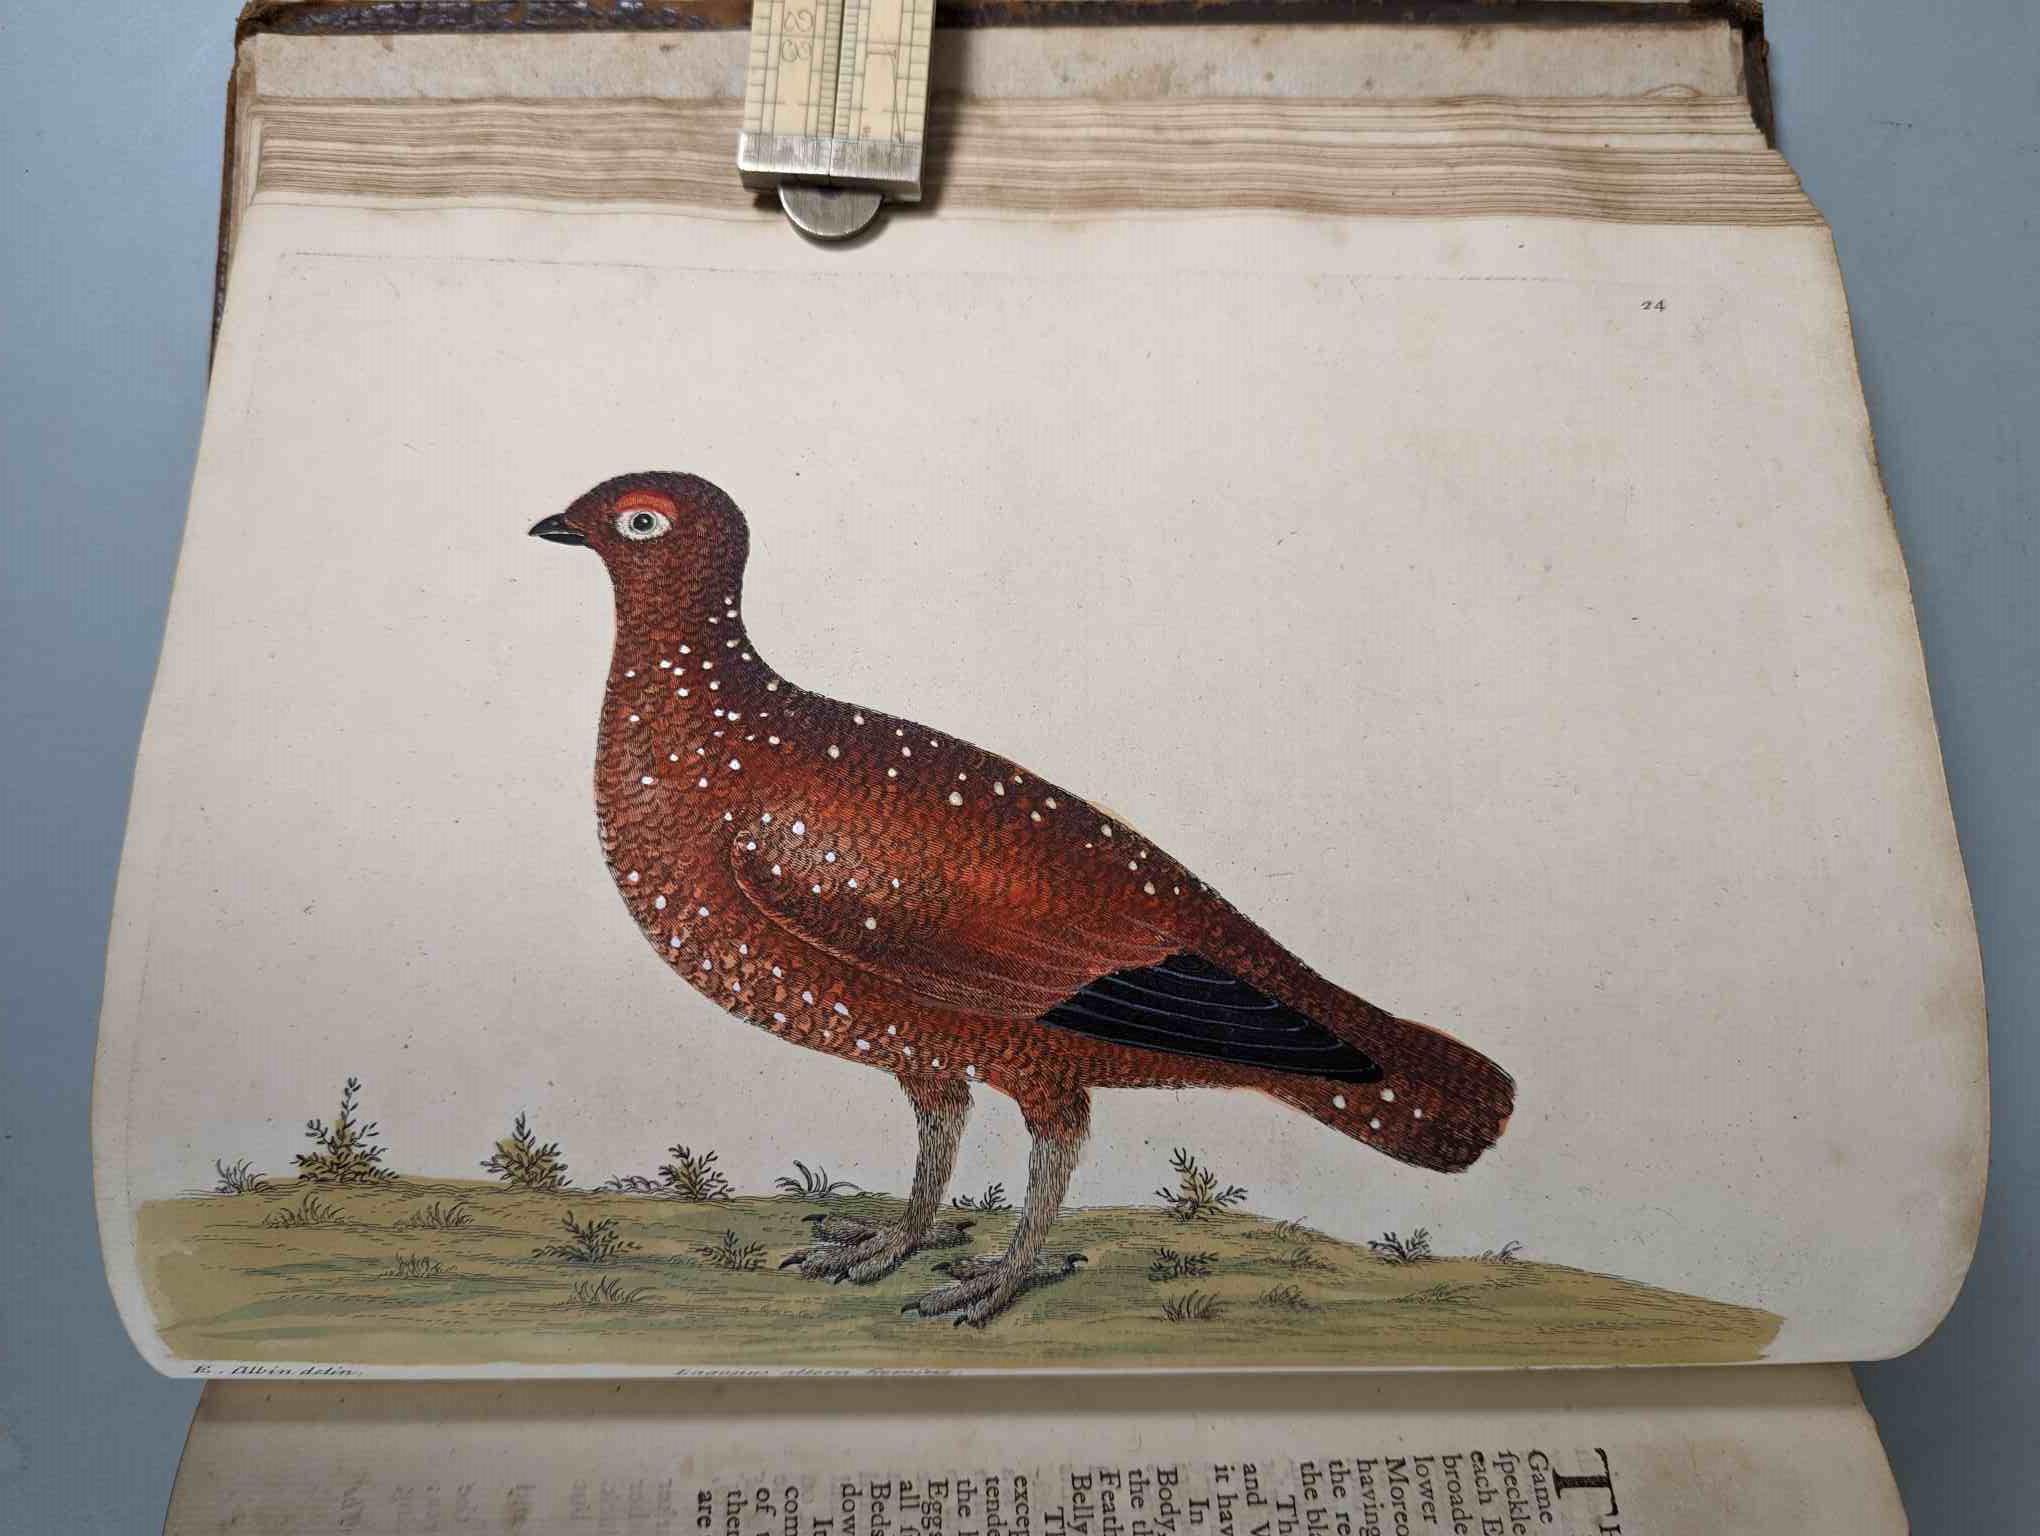 ALBIN, Eleazar. A Natural History of Birds, to which are added, Notes and Observations by W. - Image 27 of 208